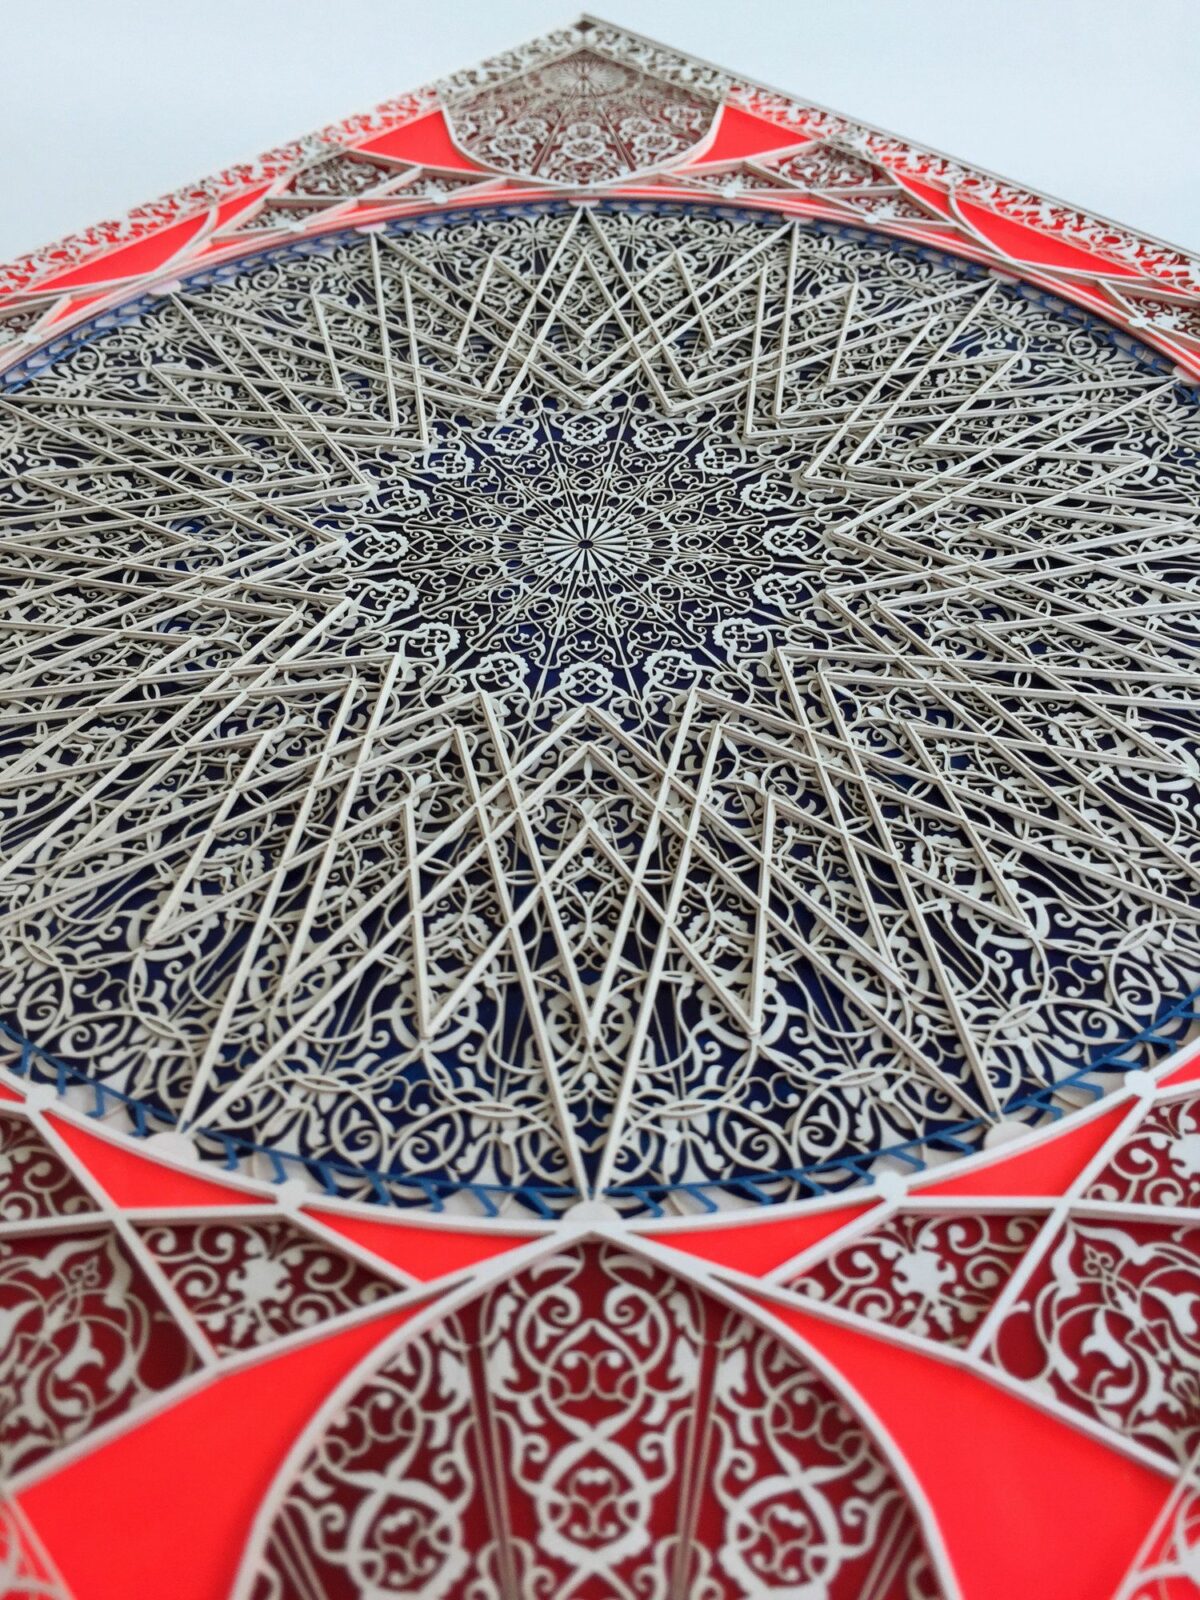 Intricate And Colorful Arabesque Made Of Laser Cut Paper Julia Ibbini 10